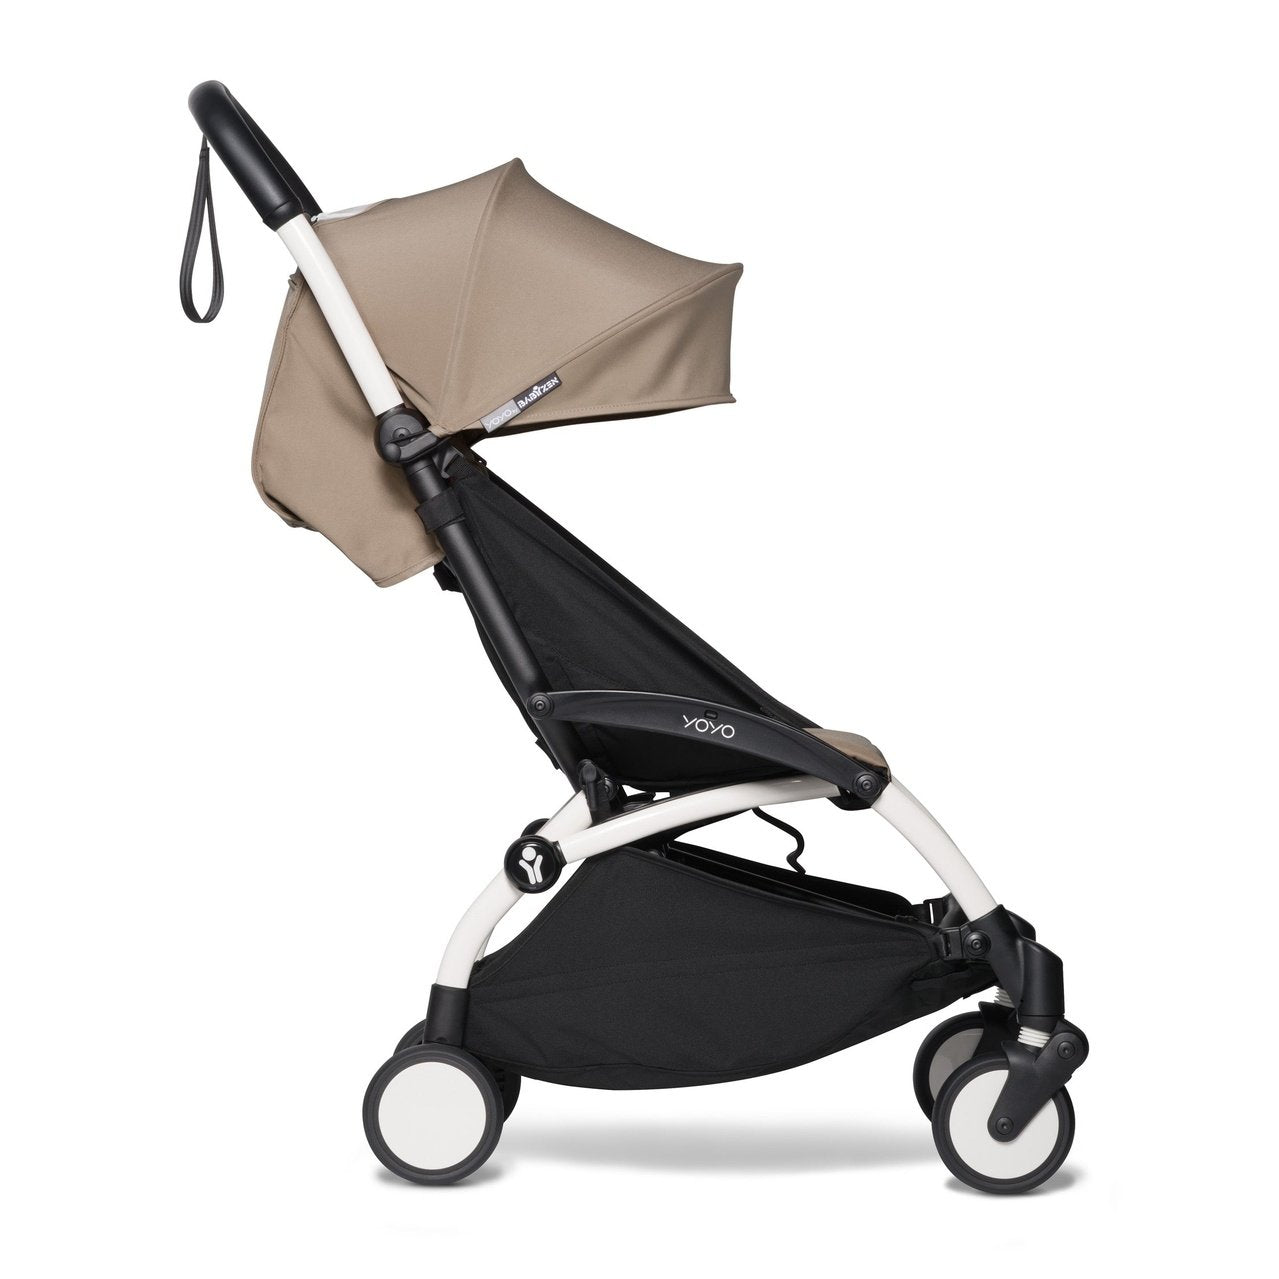 BABYZEN YOYO² (White Frame) Complete with Bassinet - Taupe with FREE 6+ Rain cover